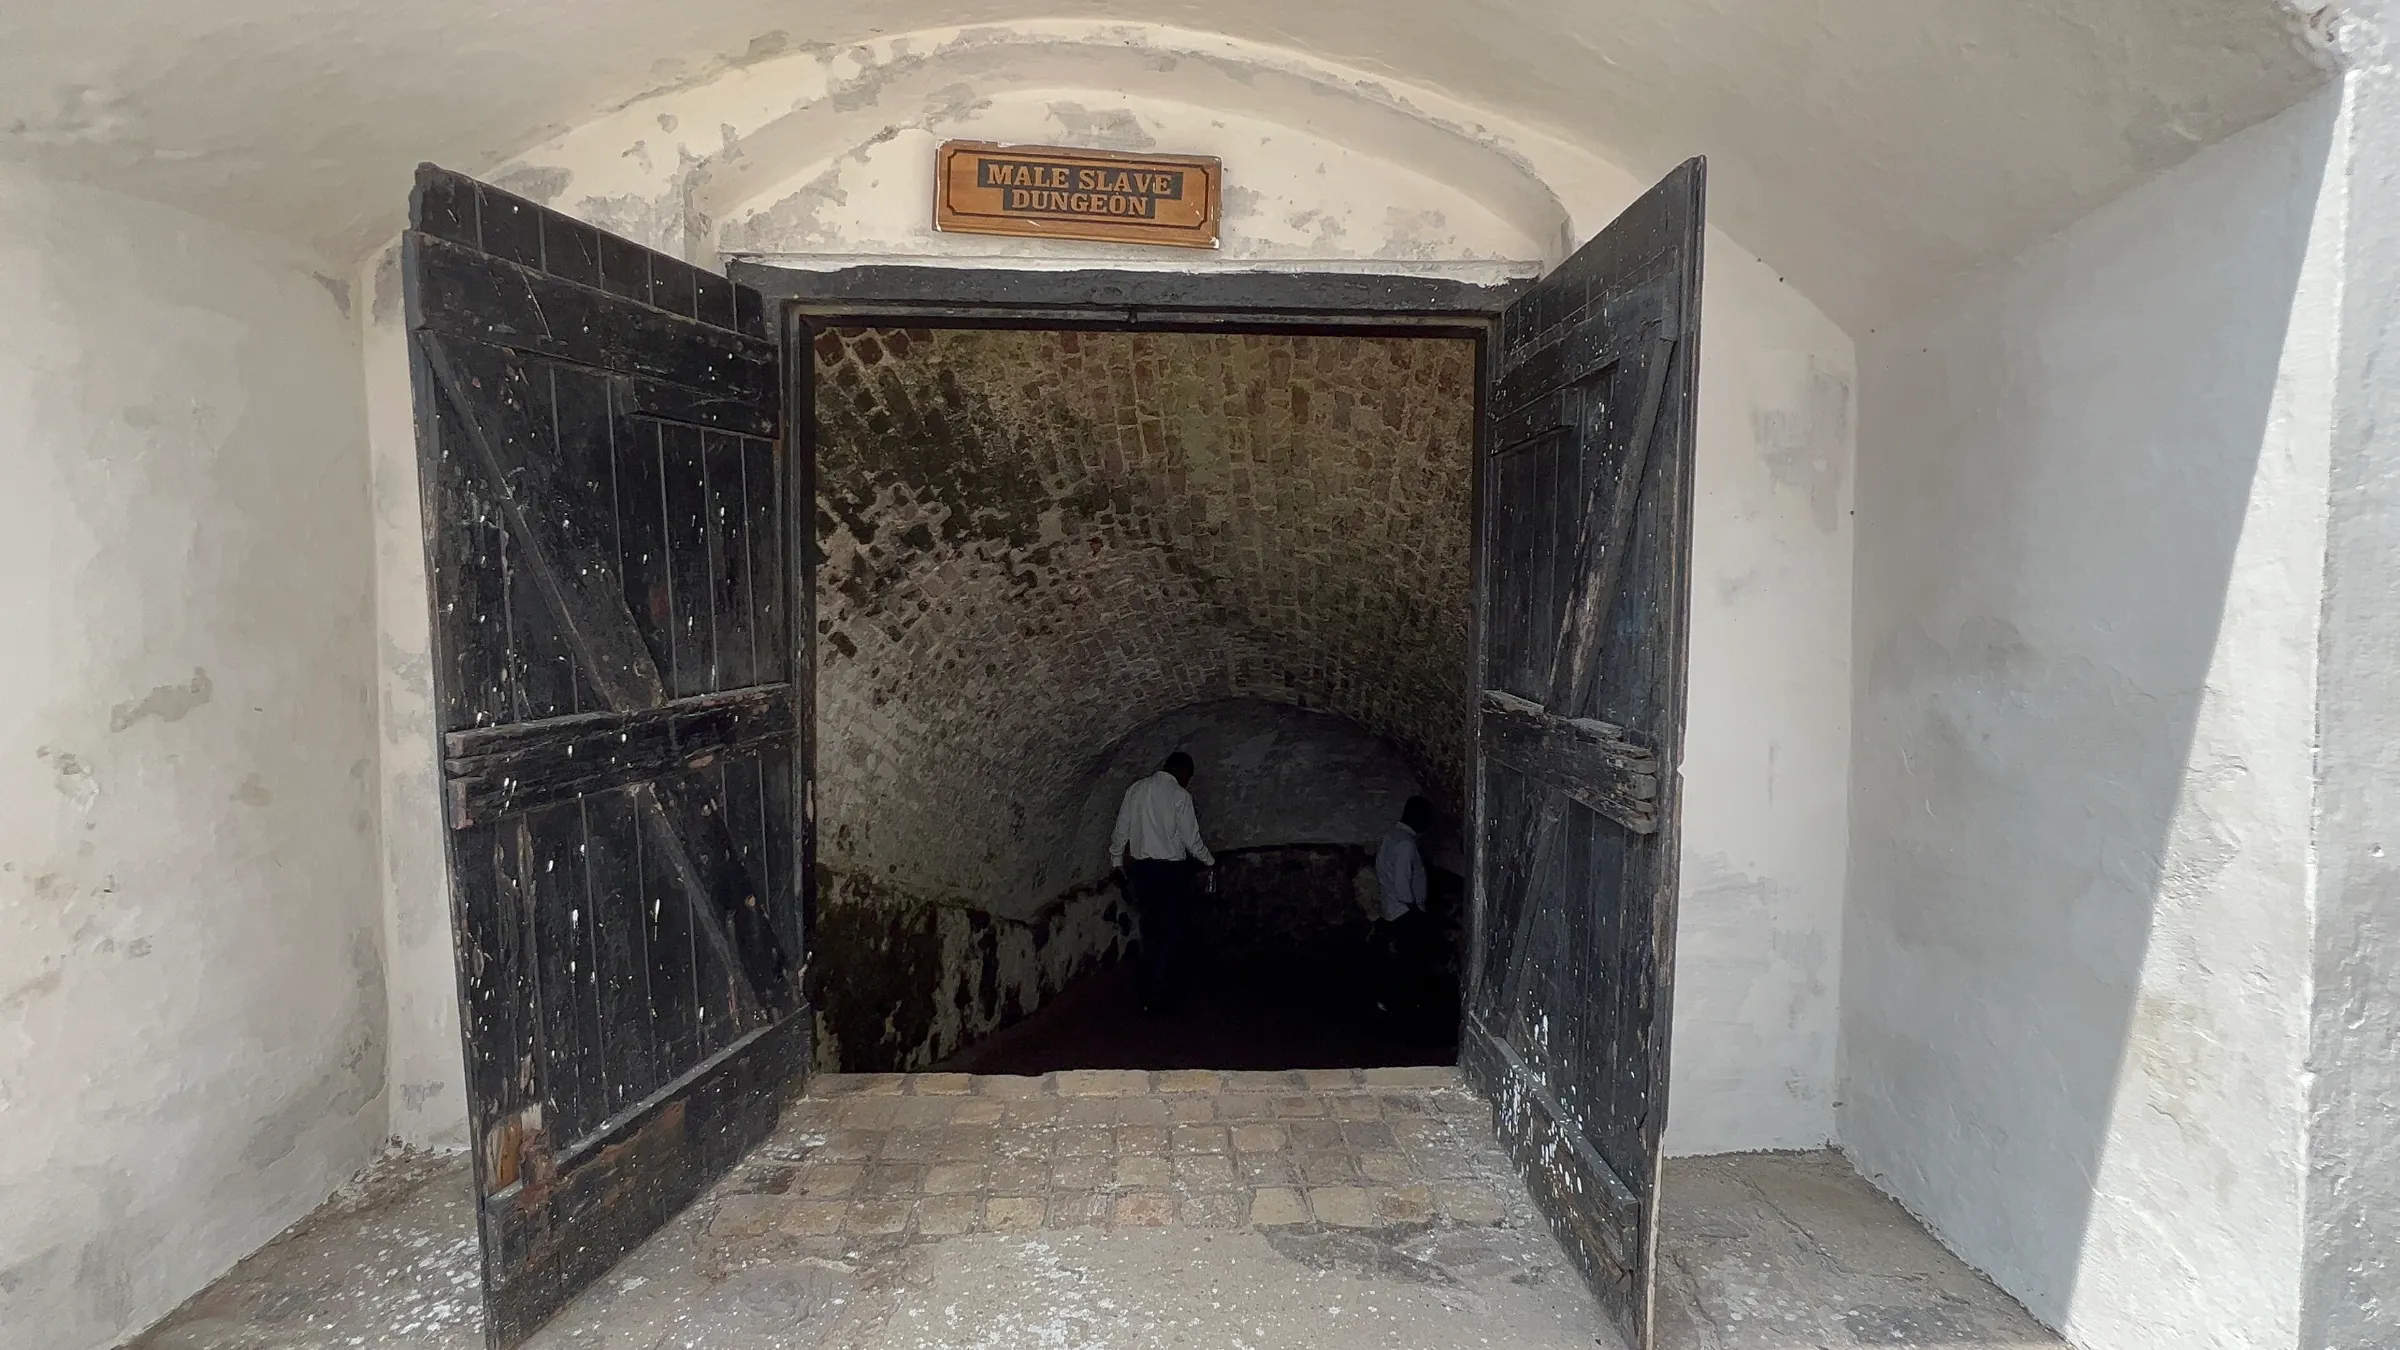 Entrance to the male slave dungeons at Cape Coast Castle on the Cape Coast, Ghana on Aug 9, 2022